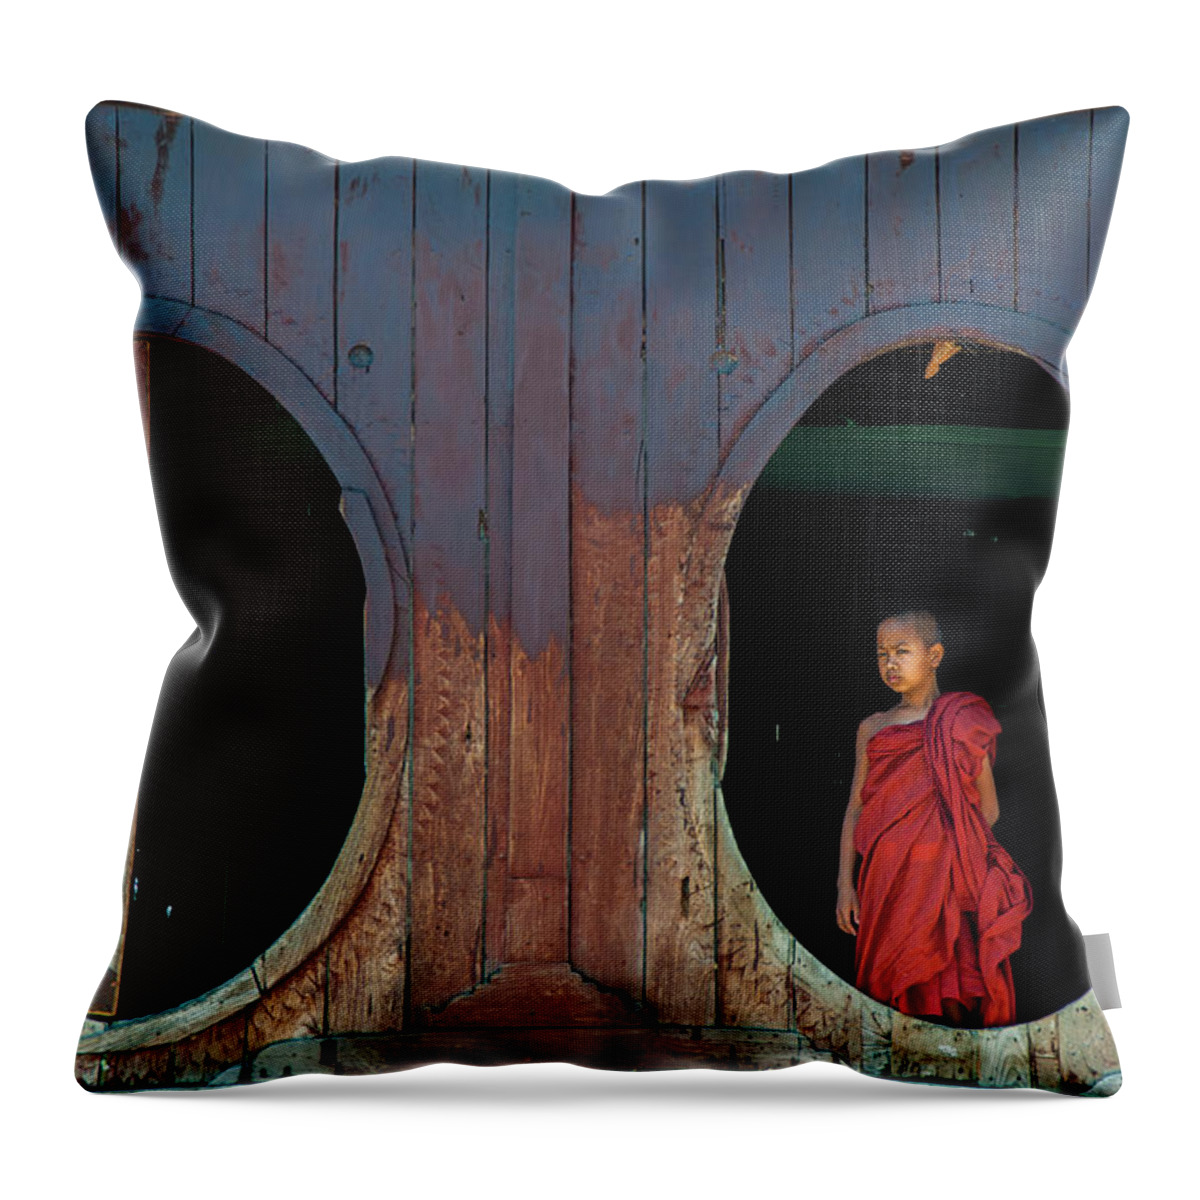 Monk Throw Pillow featuring the photograph Monk at Shwe Yan Pyay Monastery by Arj Munoz